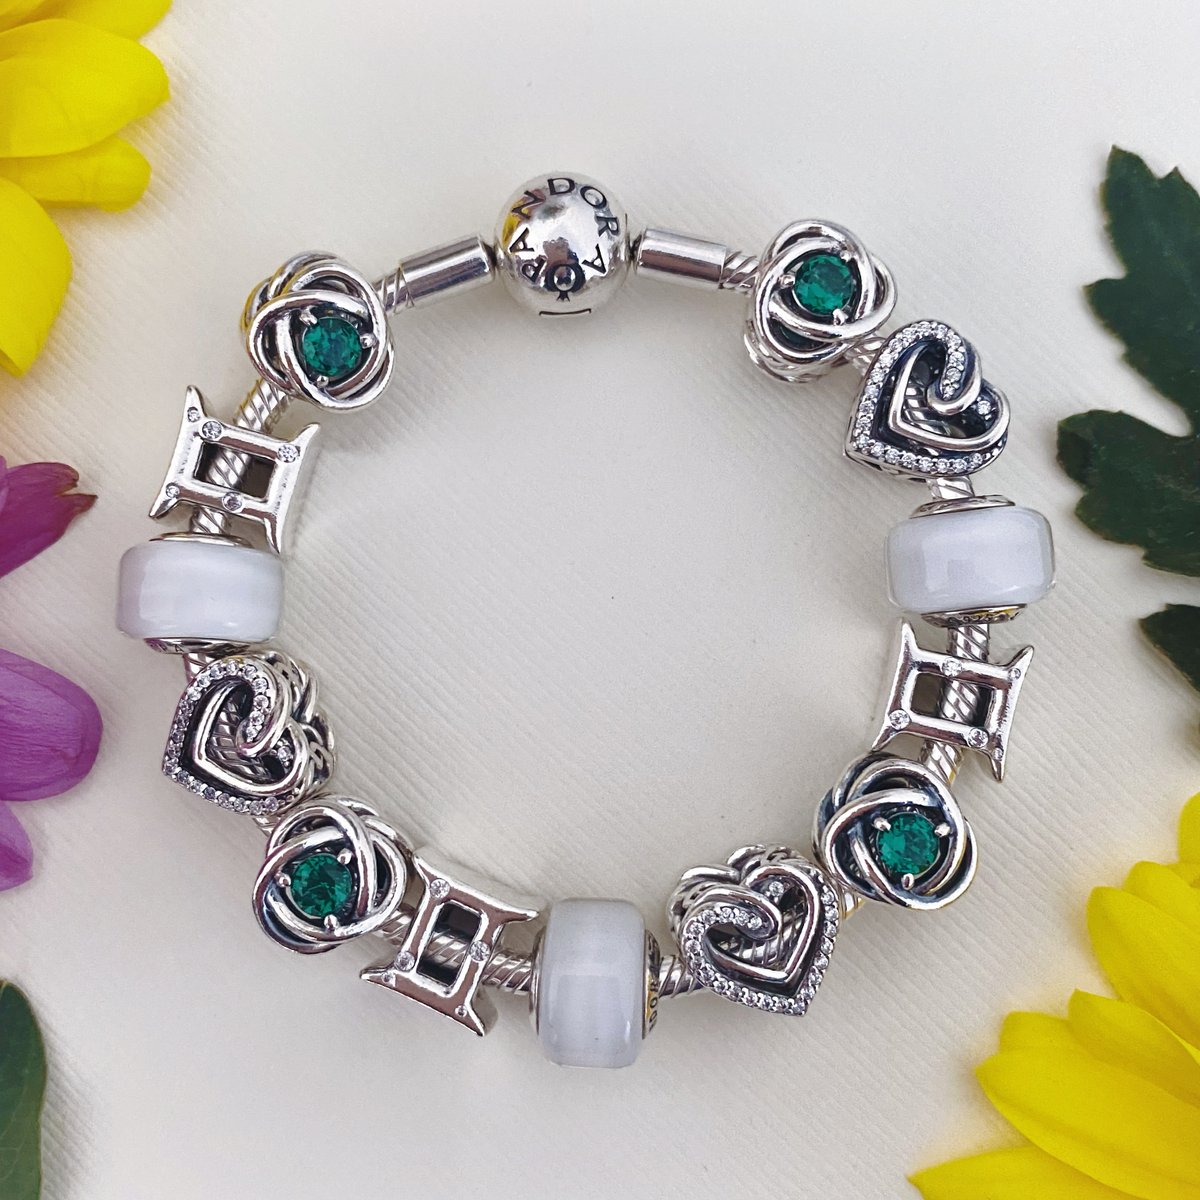 Happy May! Gift birthstone and Zodiac charms to friends and family born in May: to.pandora.net/TEk0ms 📷: instagram.com/donna_pandora